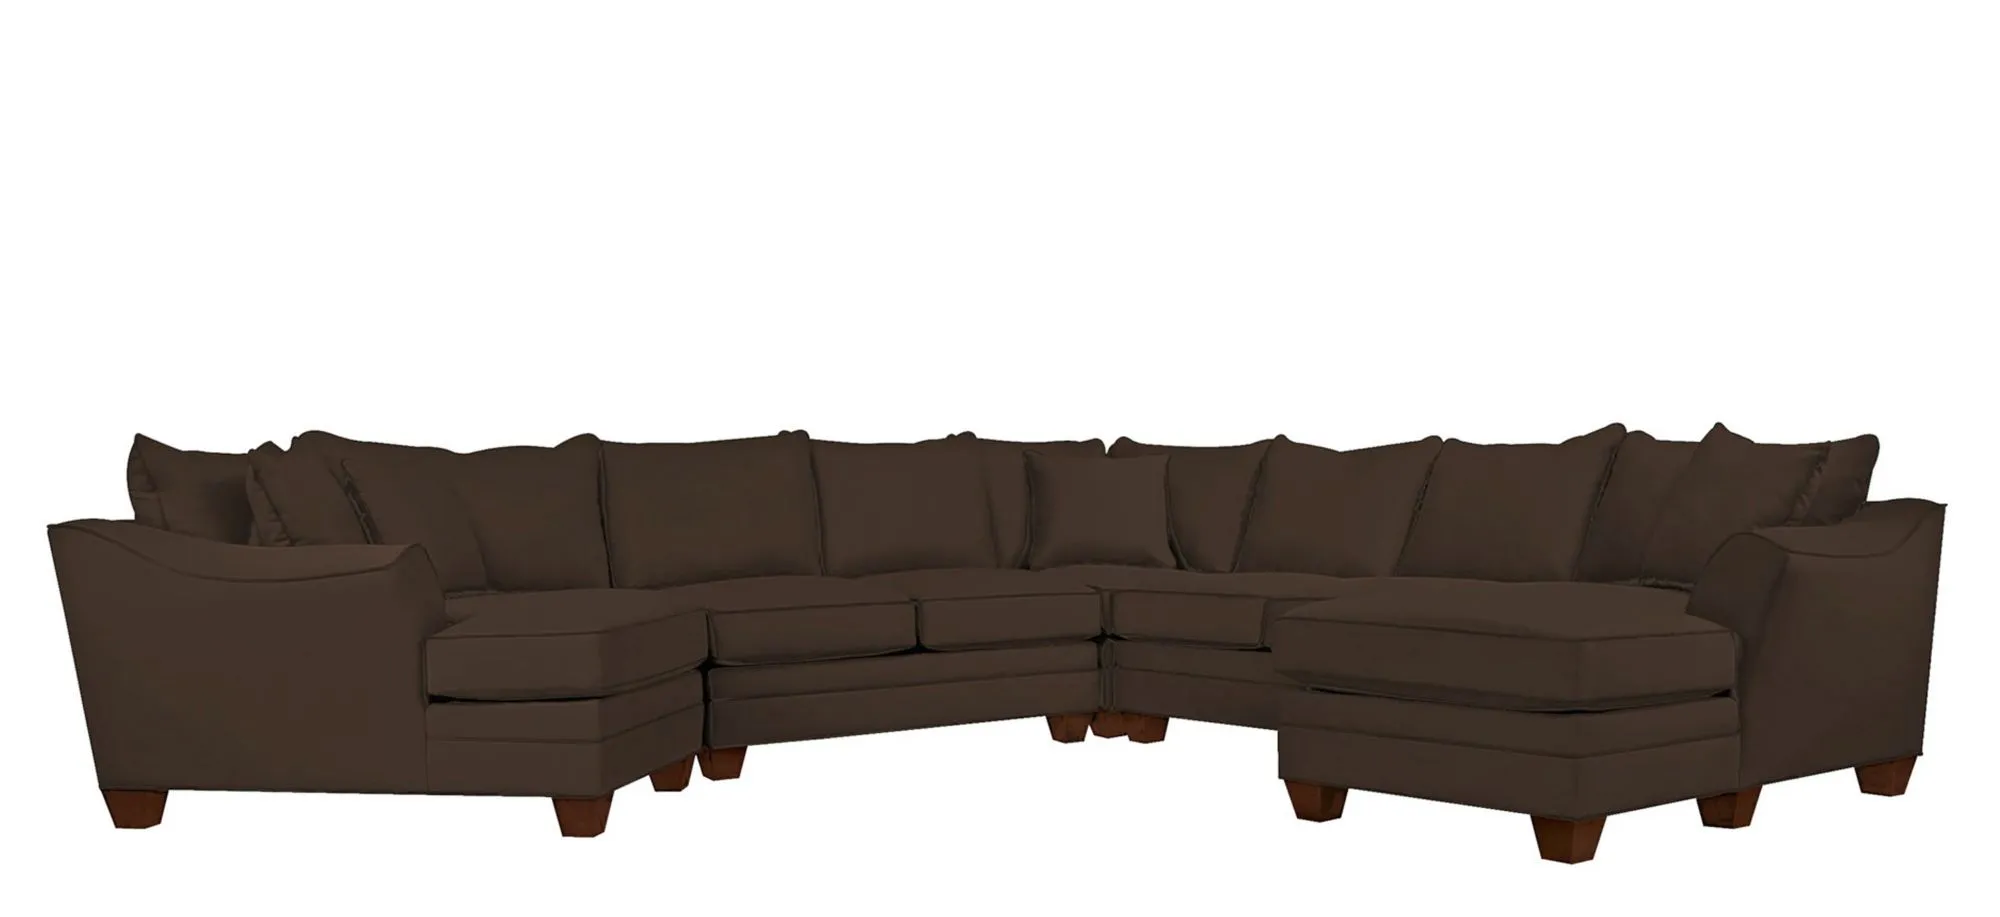 Foresthill 5-pc. Left Hand Facing Sectional Sofa in Suede So Soft Chocolate by H.M. Richards